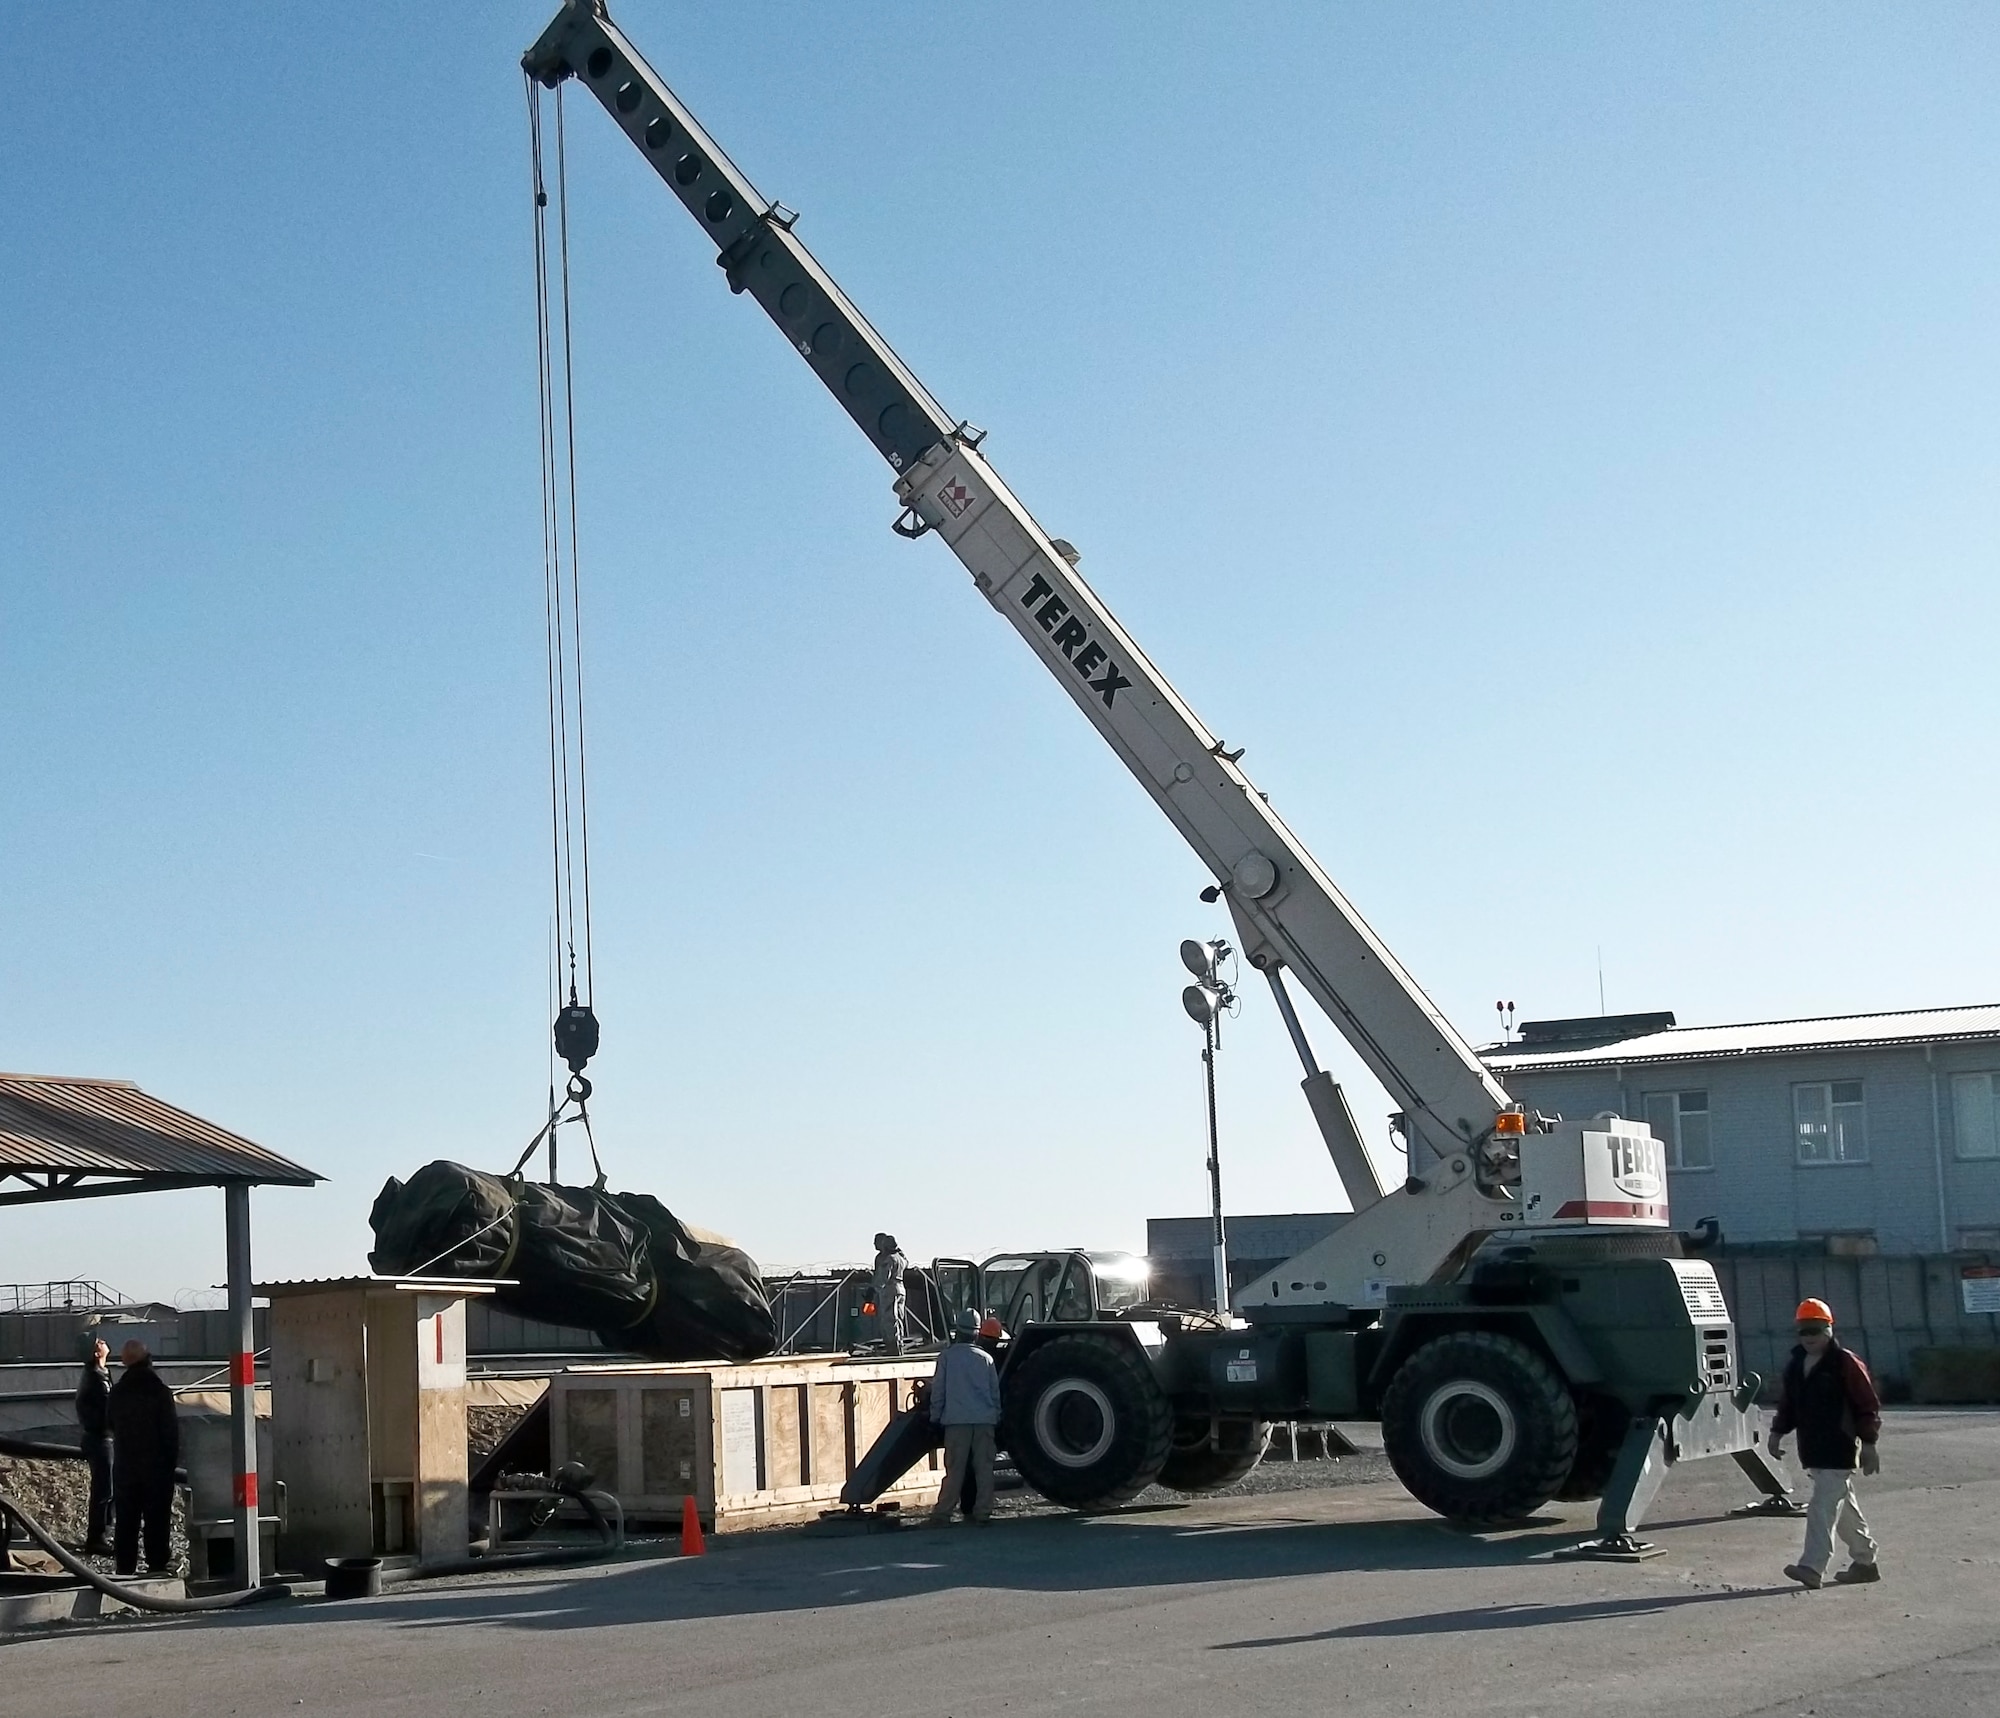 Members of the 376th Expeditionary Civil Engineer Squadron horizontal shop operate a crane to hoist a fuel bladder into place March 27, 2012, during a fuel tank and berm liner change at the Transit Center at Manas, Kyrgyzstan. The 1,200-pound berm liner and 7,500-pound fuel tank took four days to change; the 376th ECES removed the old ones from the containment area.  (U.S. Air Force courtesy photo)